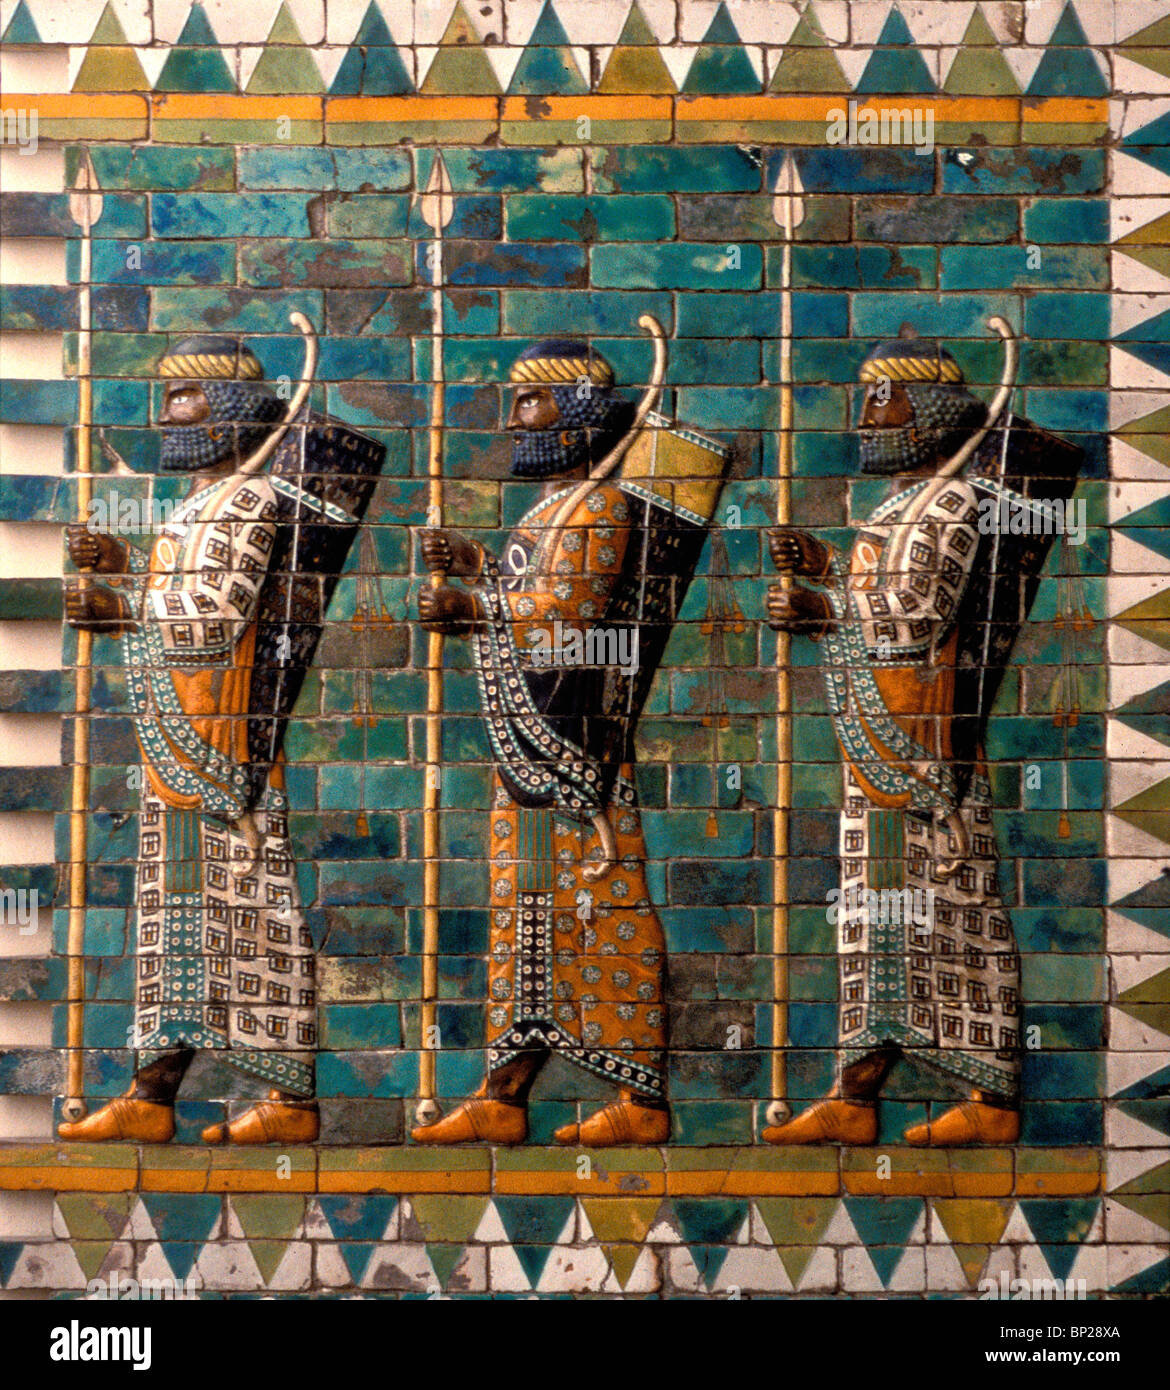 ELAMITE GUARD OF THE PERSIAN ARMY DEPICTED IN FULL SPLENDOR. GLAZED BRICK FROM THE ACHAEMENID PALACE IN SUSA - PERSIA 6TH.C. Stock Photo